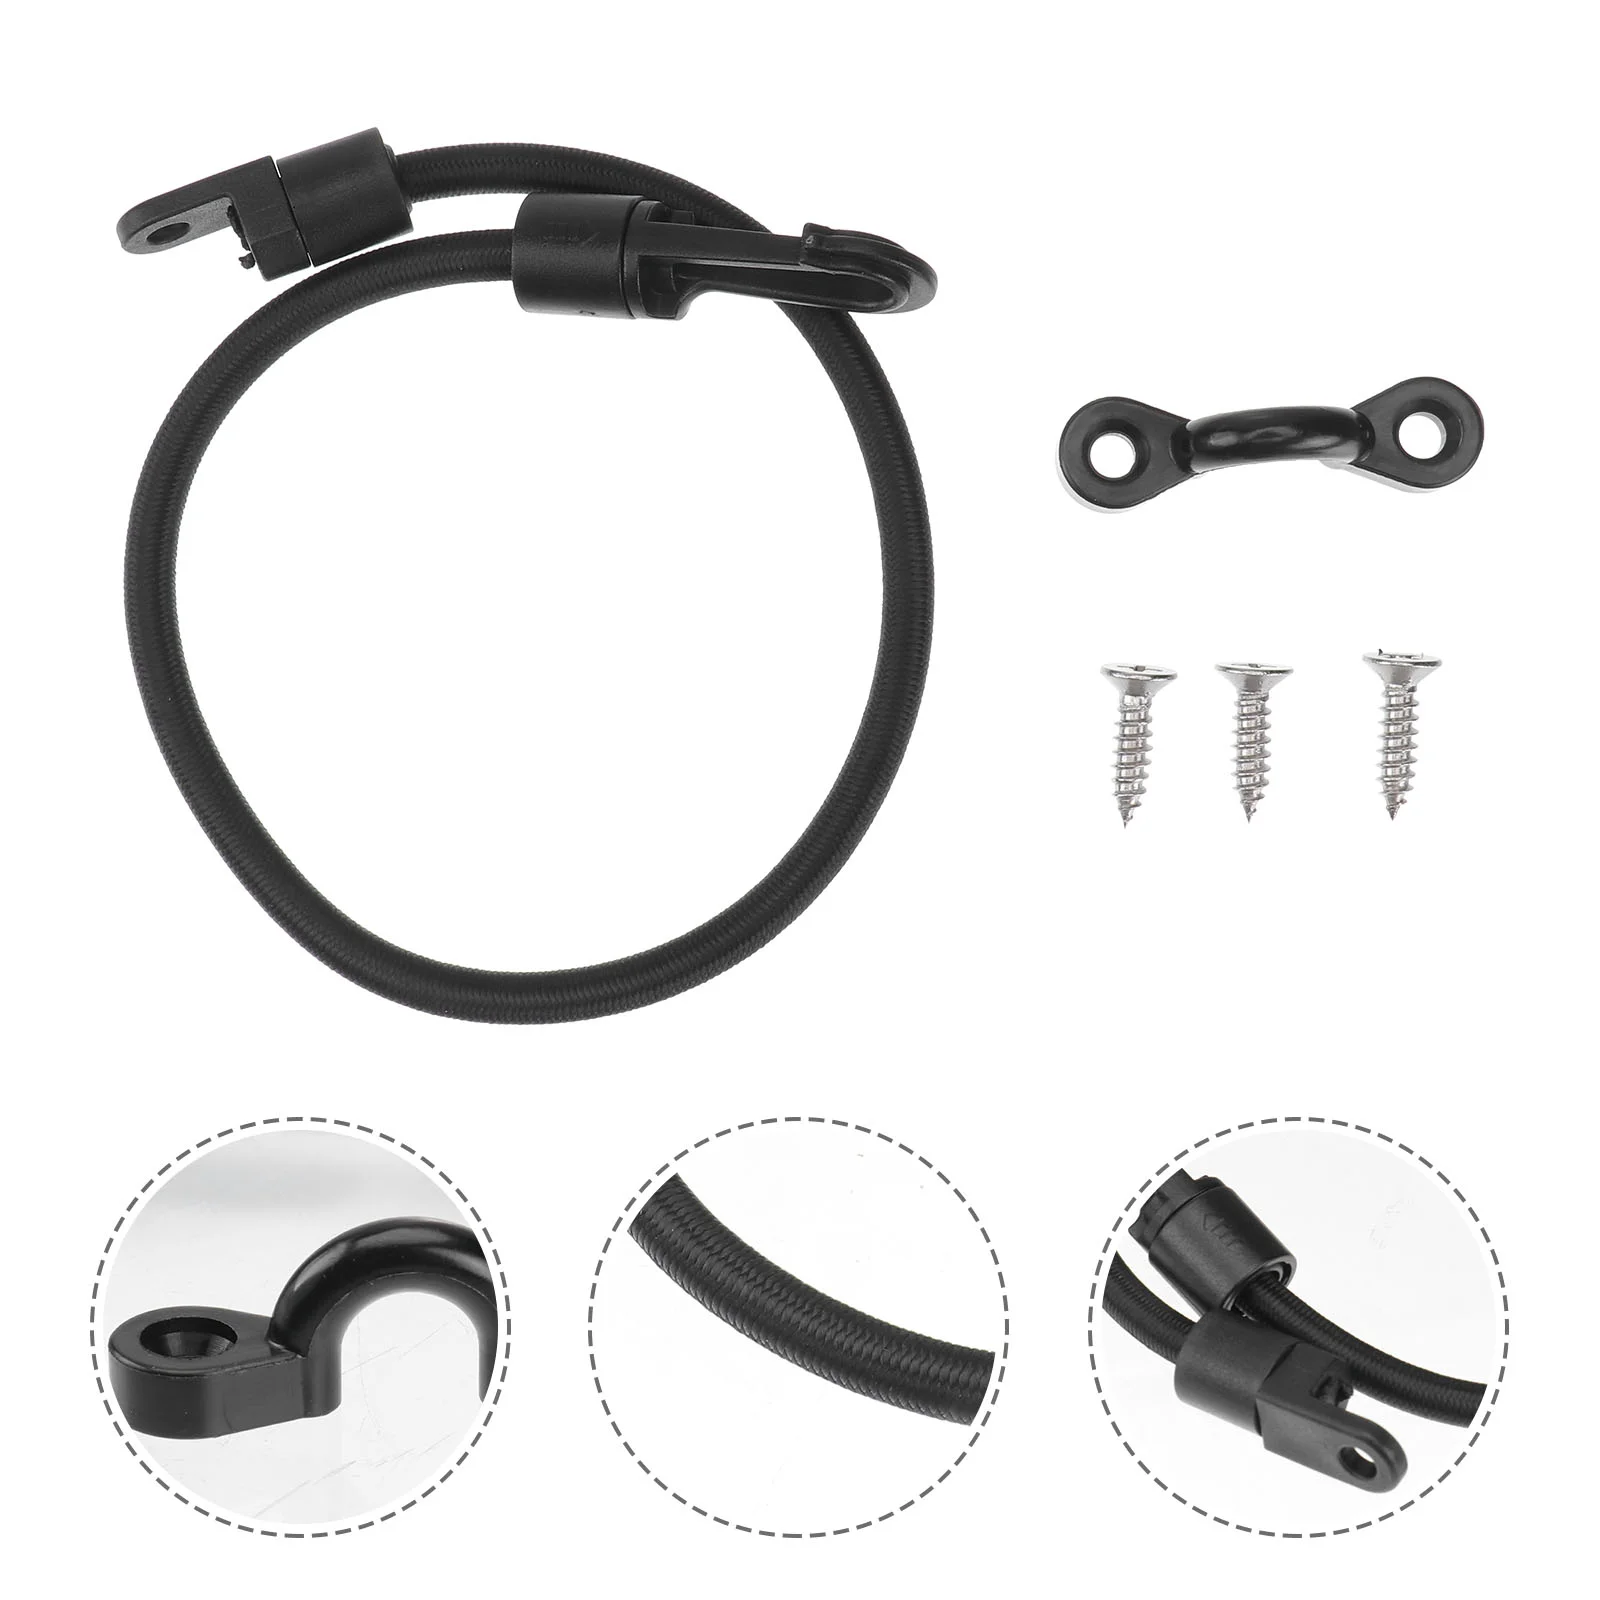 

Rod Boat Tamer Mount Holder Strap Deck Belt Straps Replacement Gunwale Saver Paddle Marine Pole Adapter Supply Hold Connector Or